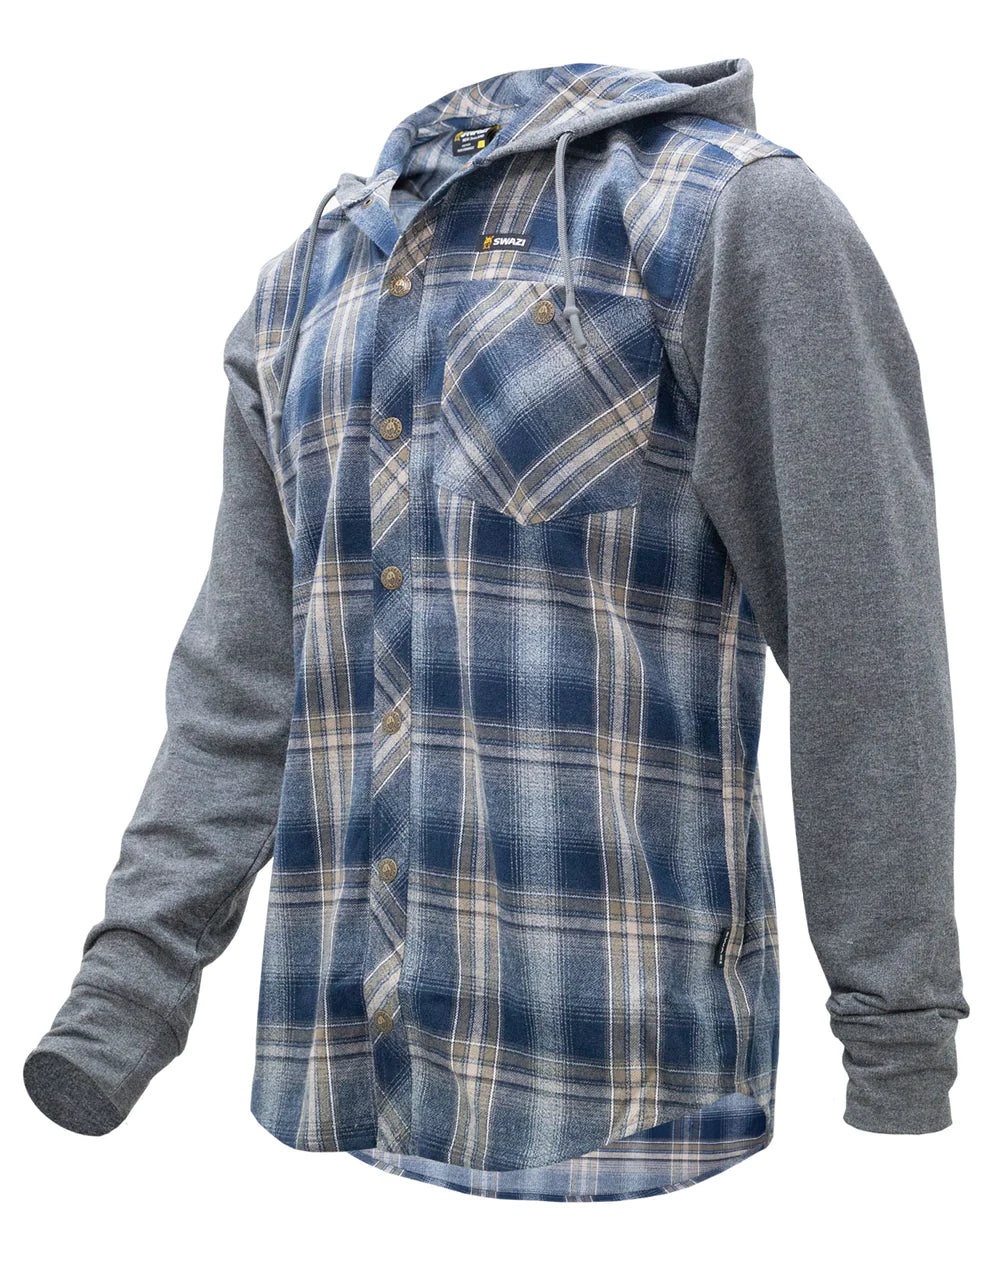 Swazi Apprentice Hooded Shirt - XS / NAVY - Mansfield Hunting & Fishing - Products to prepare for Corona Virus